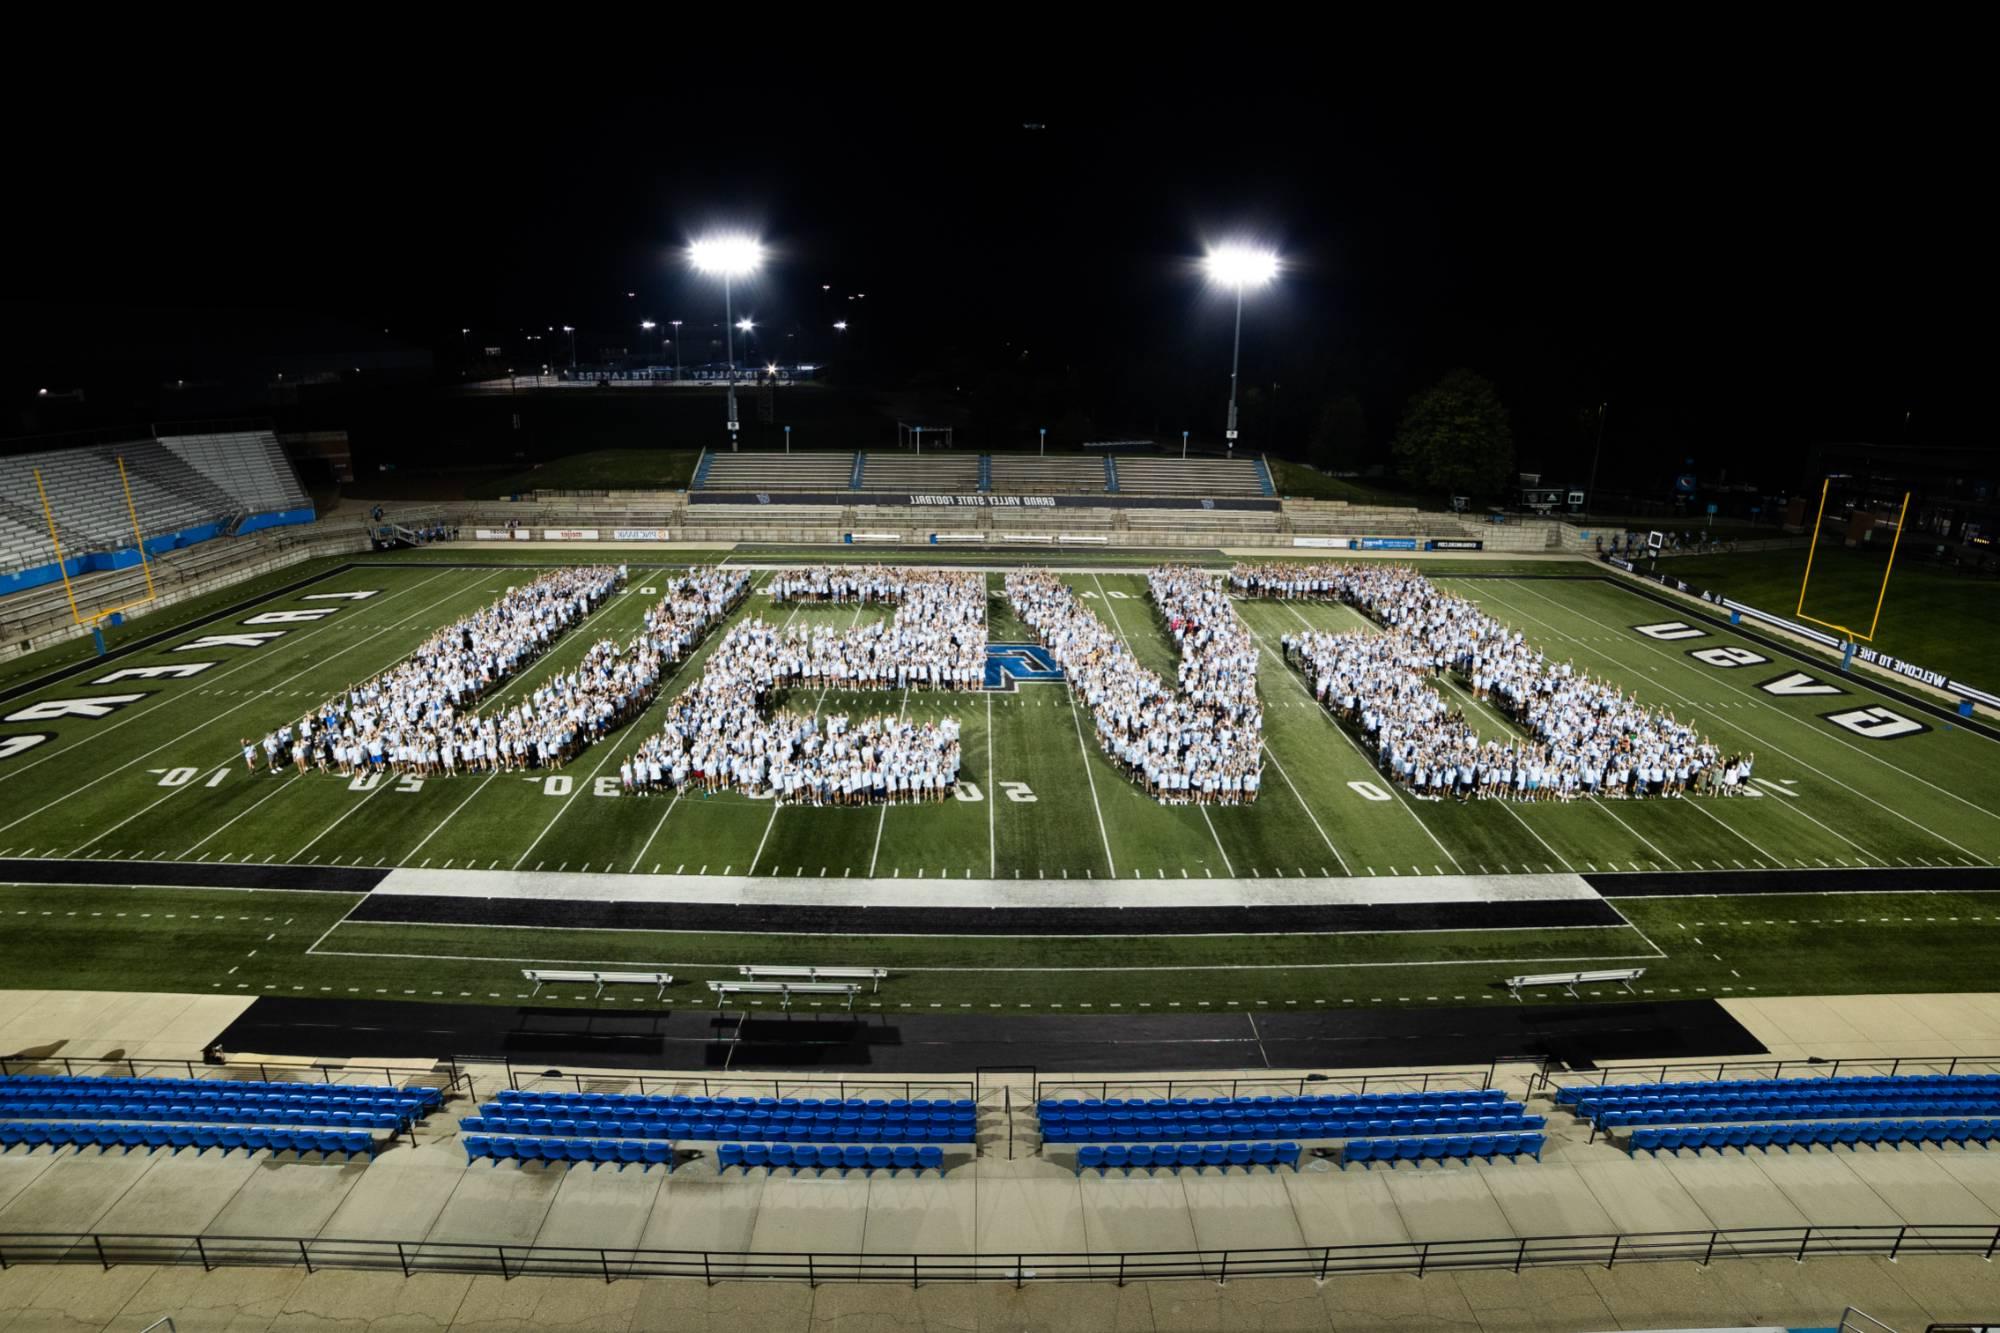 Class of 2026 class photo - students assembled on the football field to form the shape of the GVSU letters